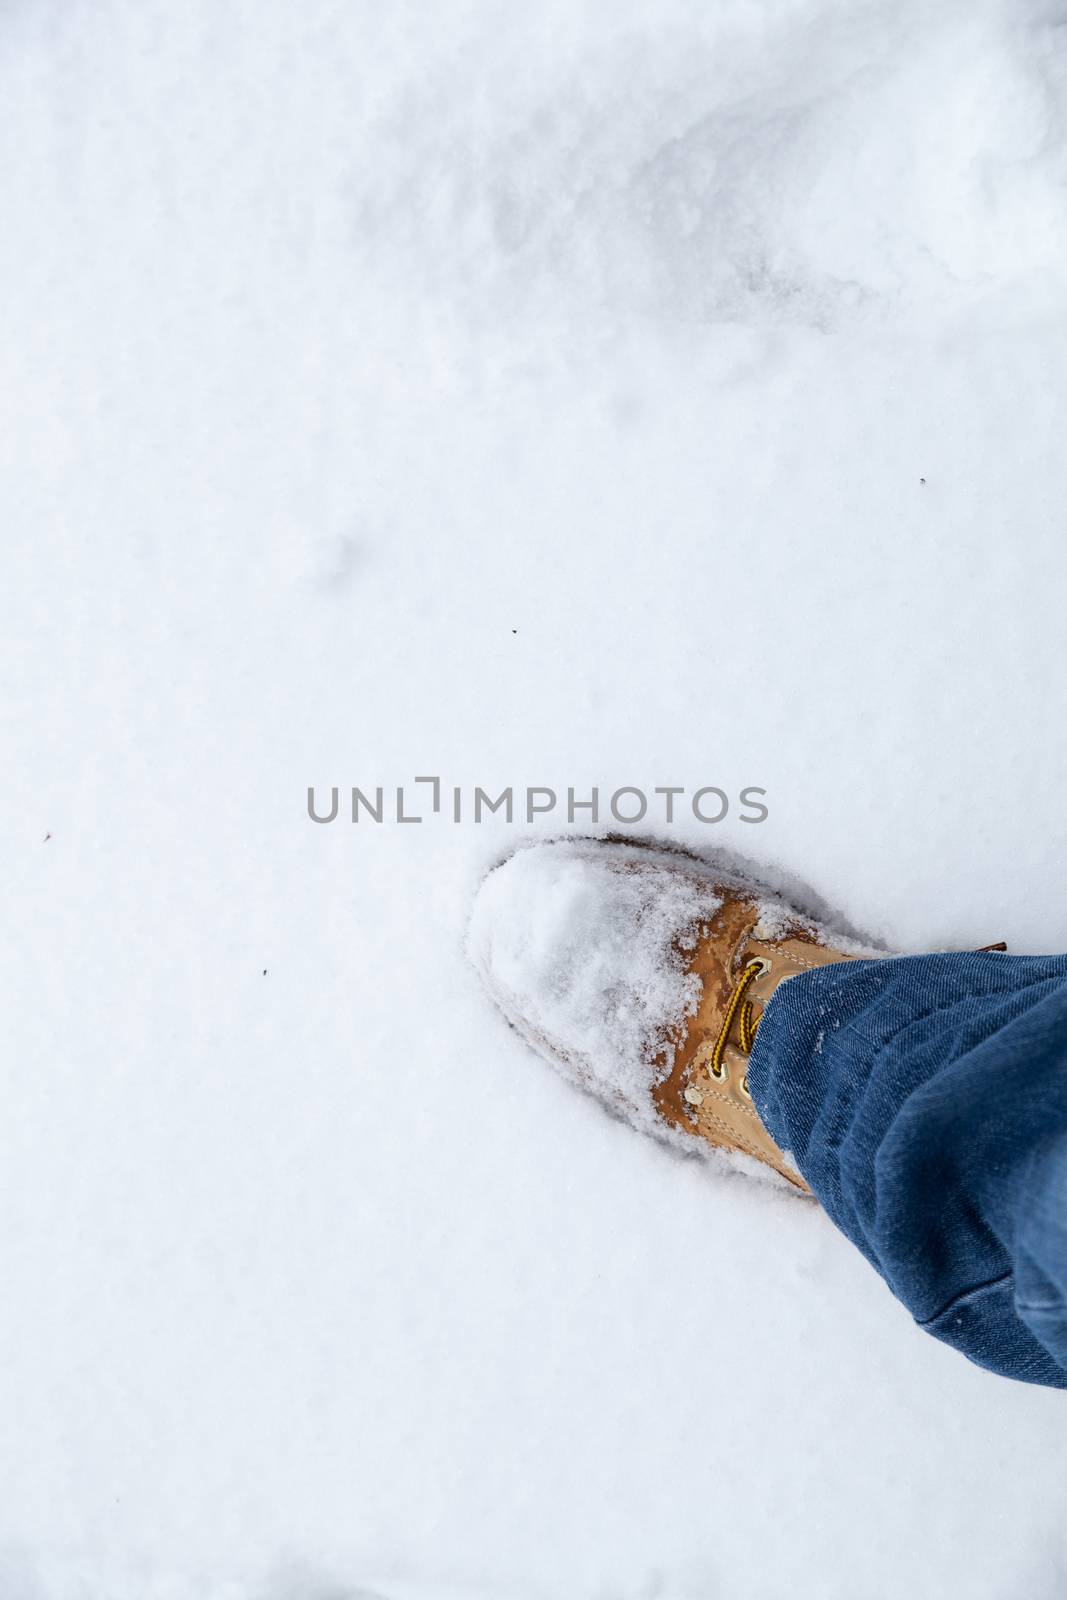 Snow and Boots by ruy_guerra